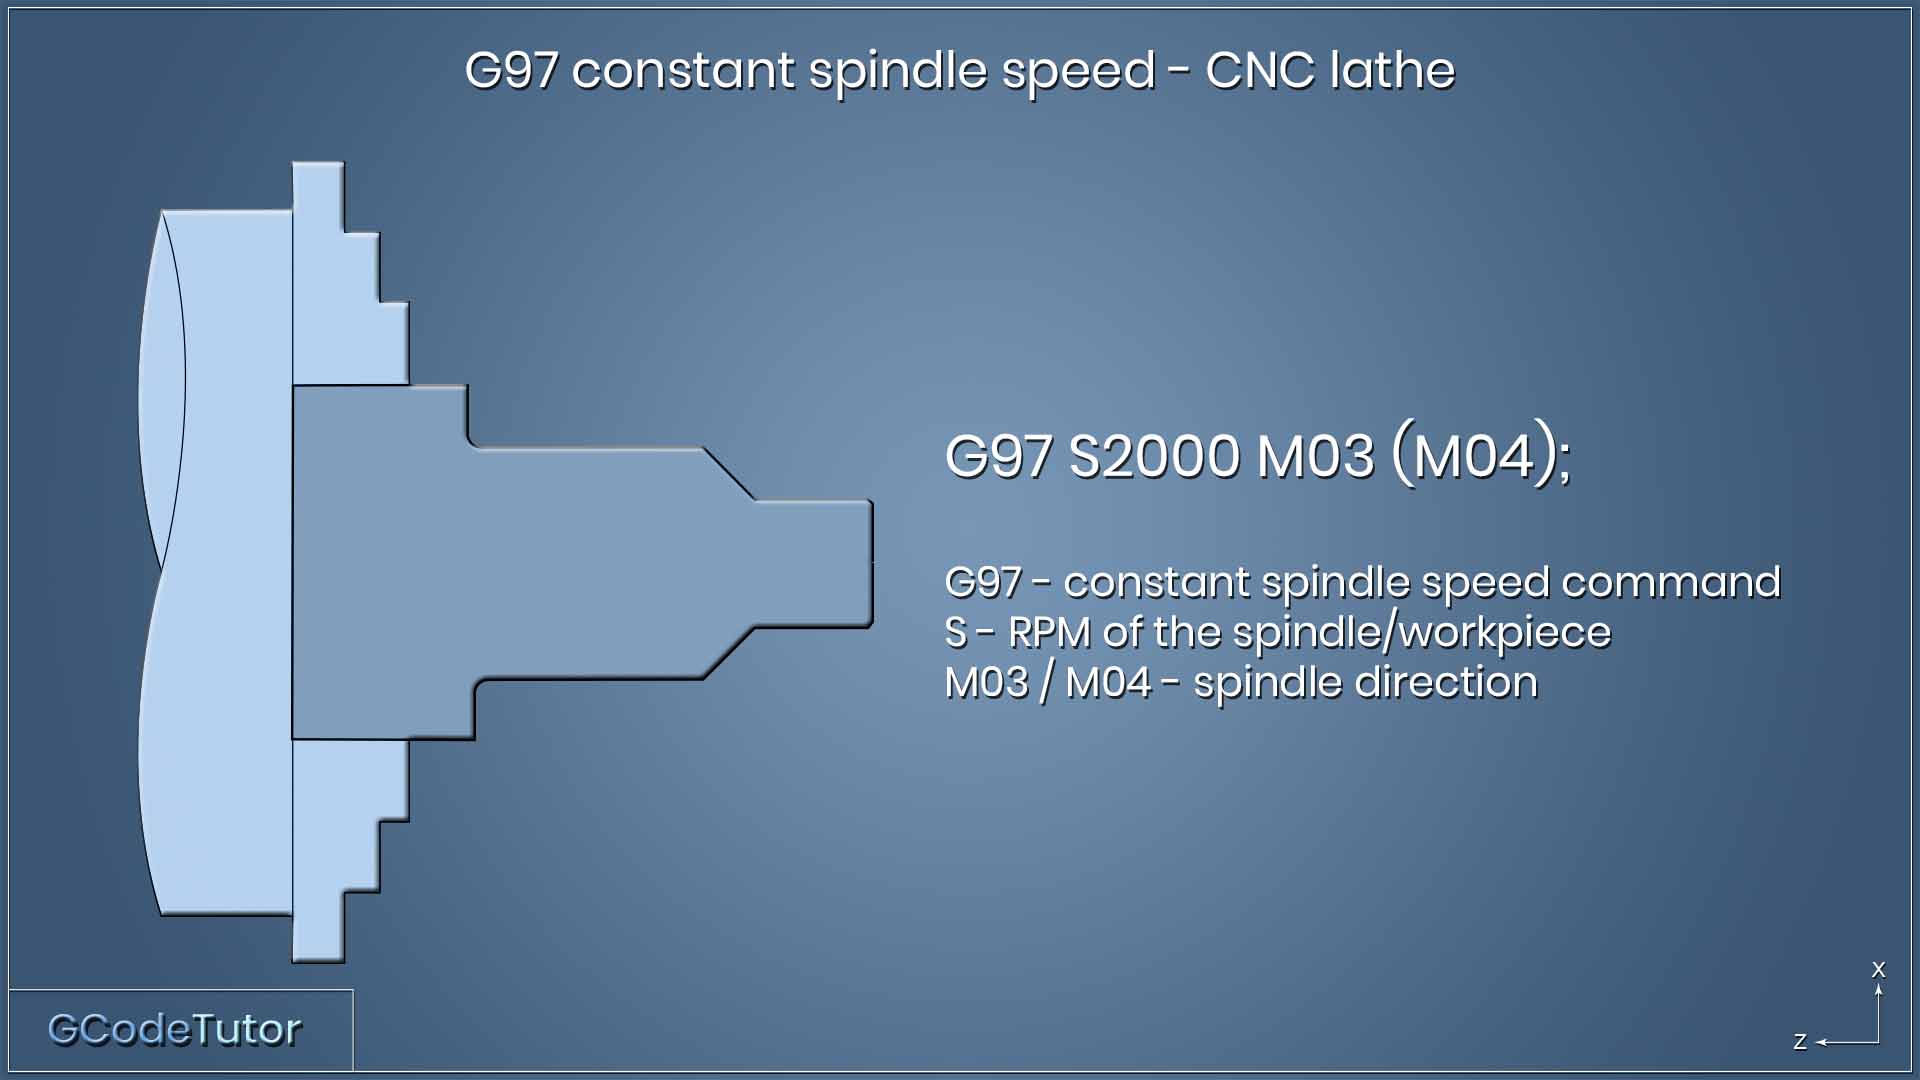 How to Change Spindle Speeds in CNC Lathe?